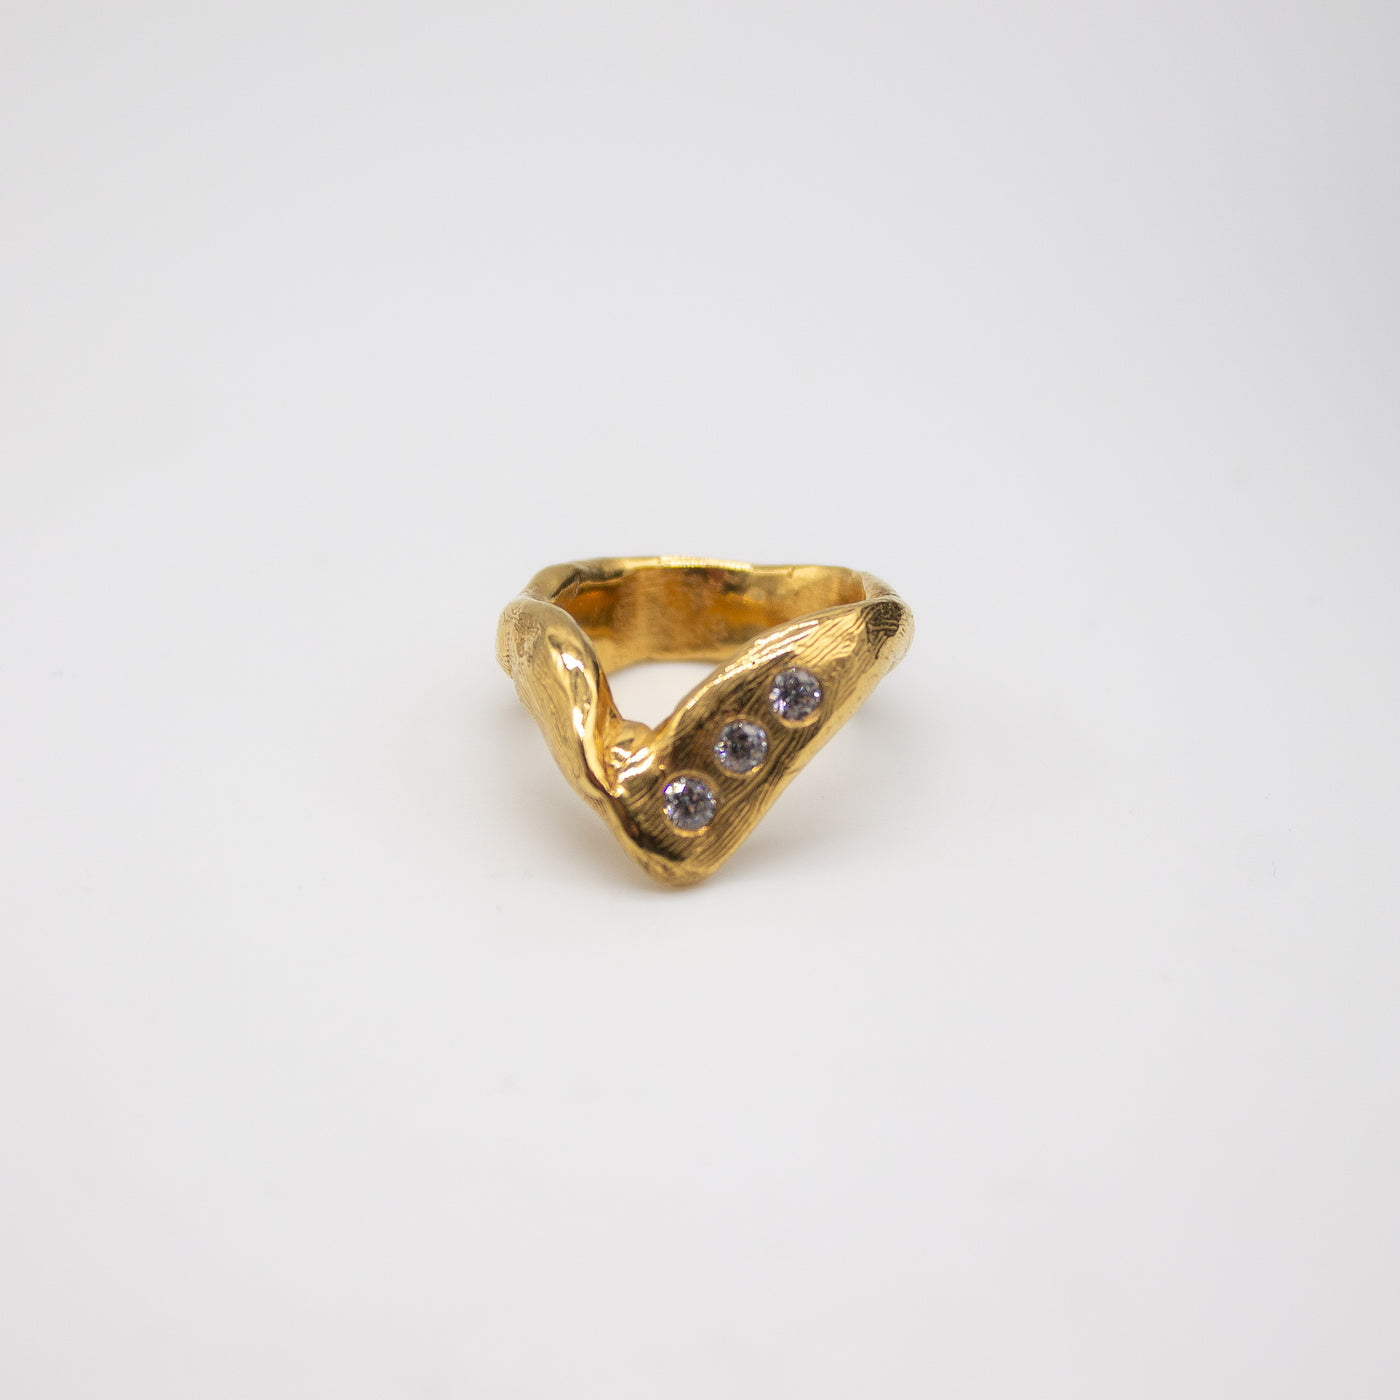 DRONNINGLUND // Gold-plated ring with 3 set zirconia stones